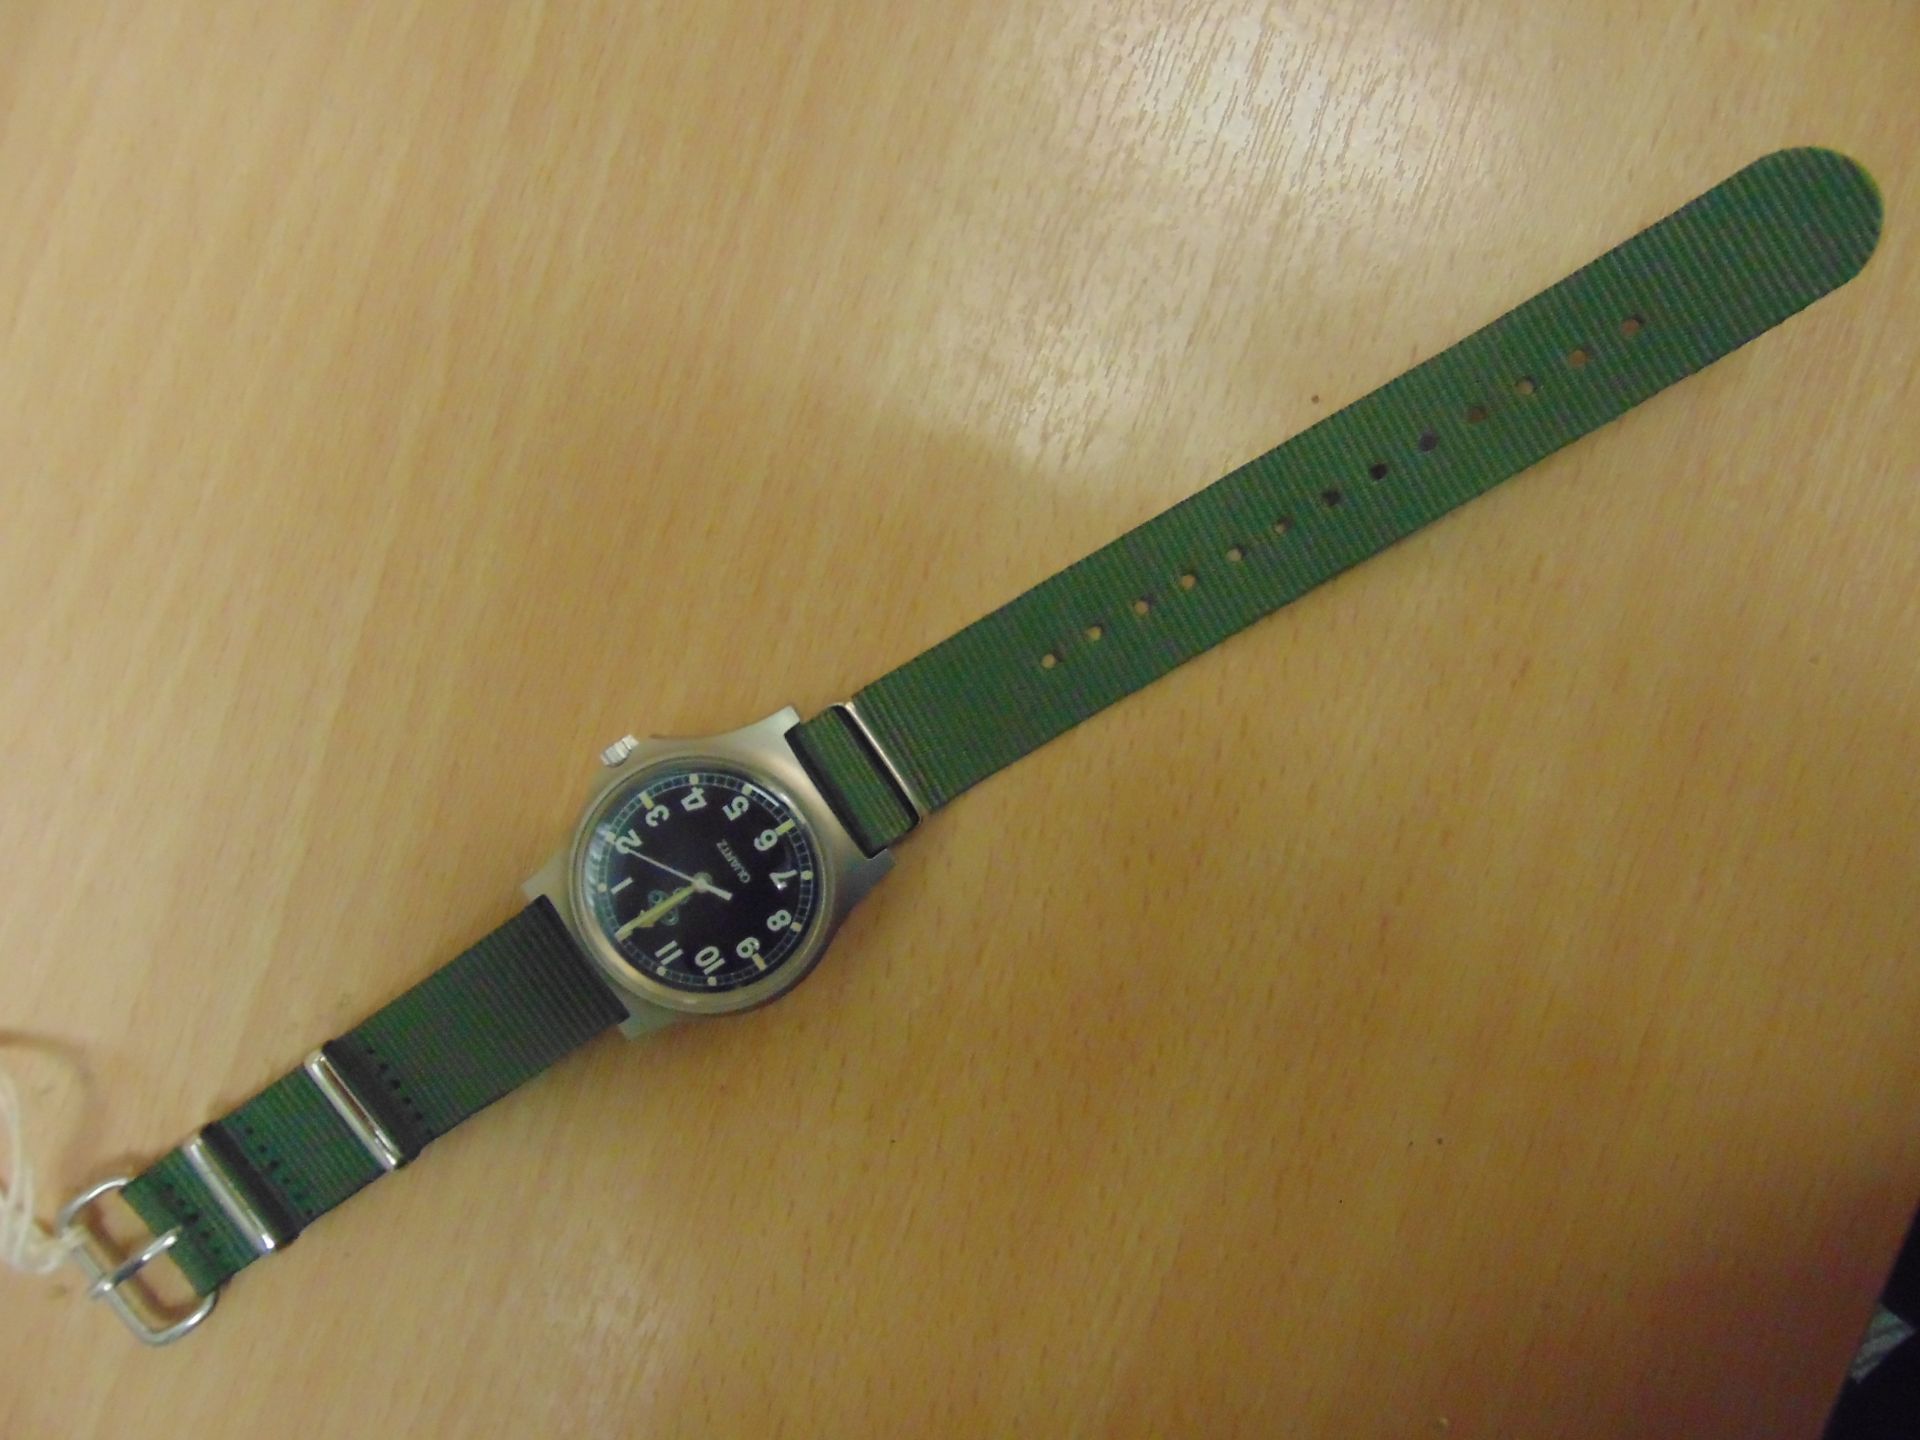 VERY RARE UNISSUED CWC W10 FAT BOY SERVICE WATCH NATO MARKED DATED 1982 - FALKLANDS WAR - Image 10 of 10